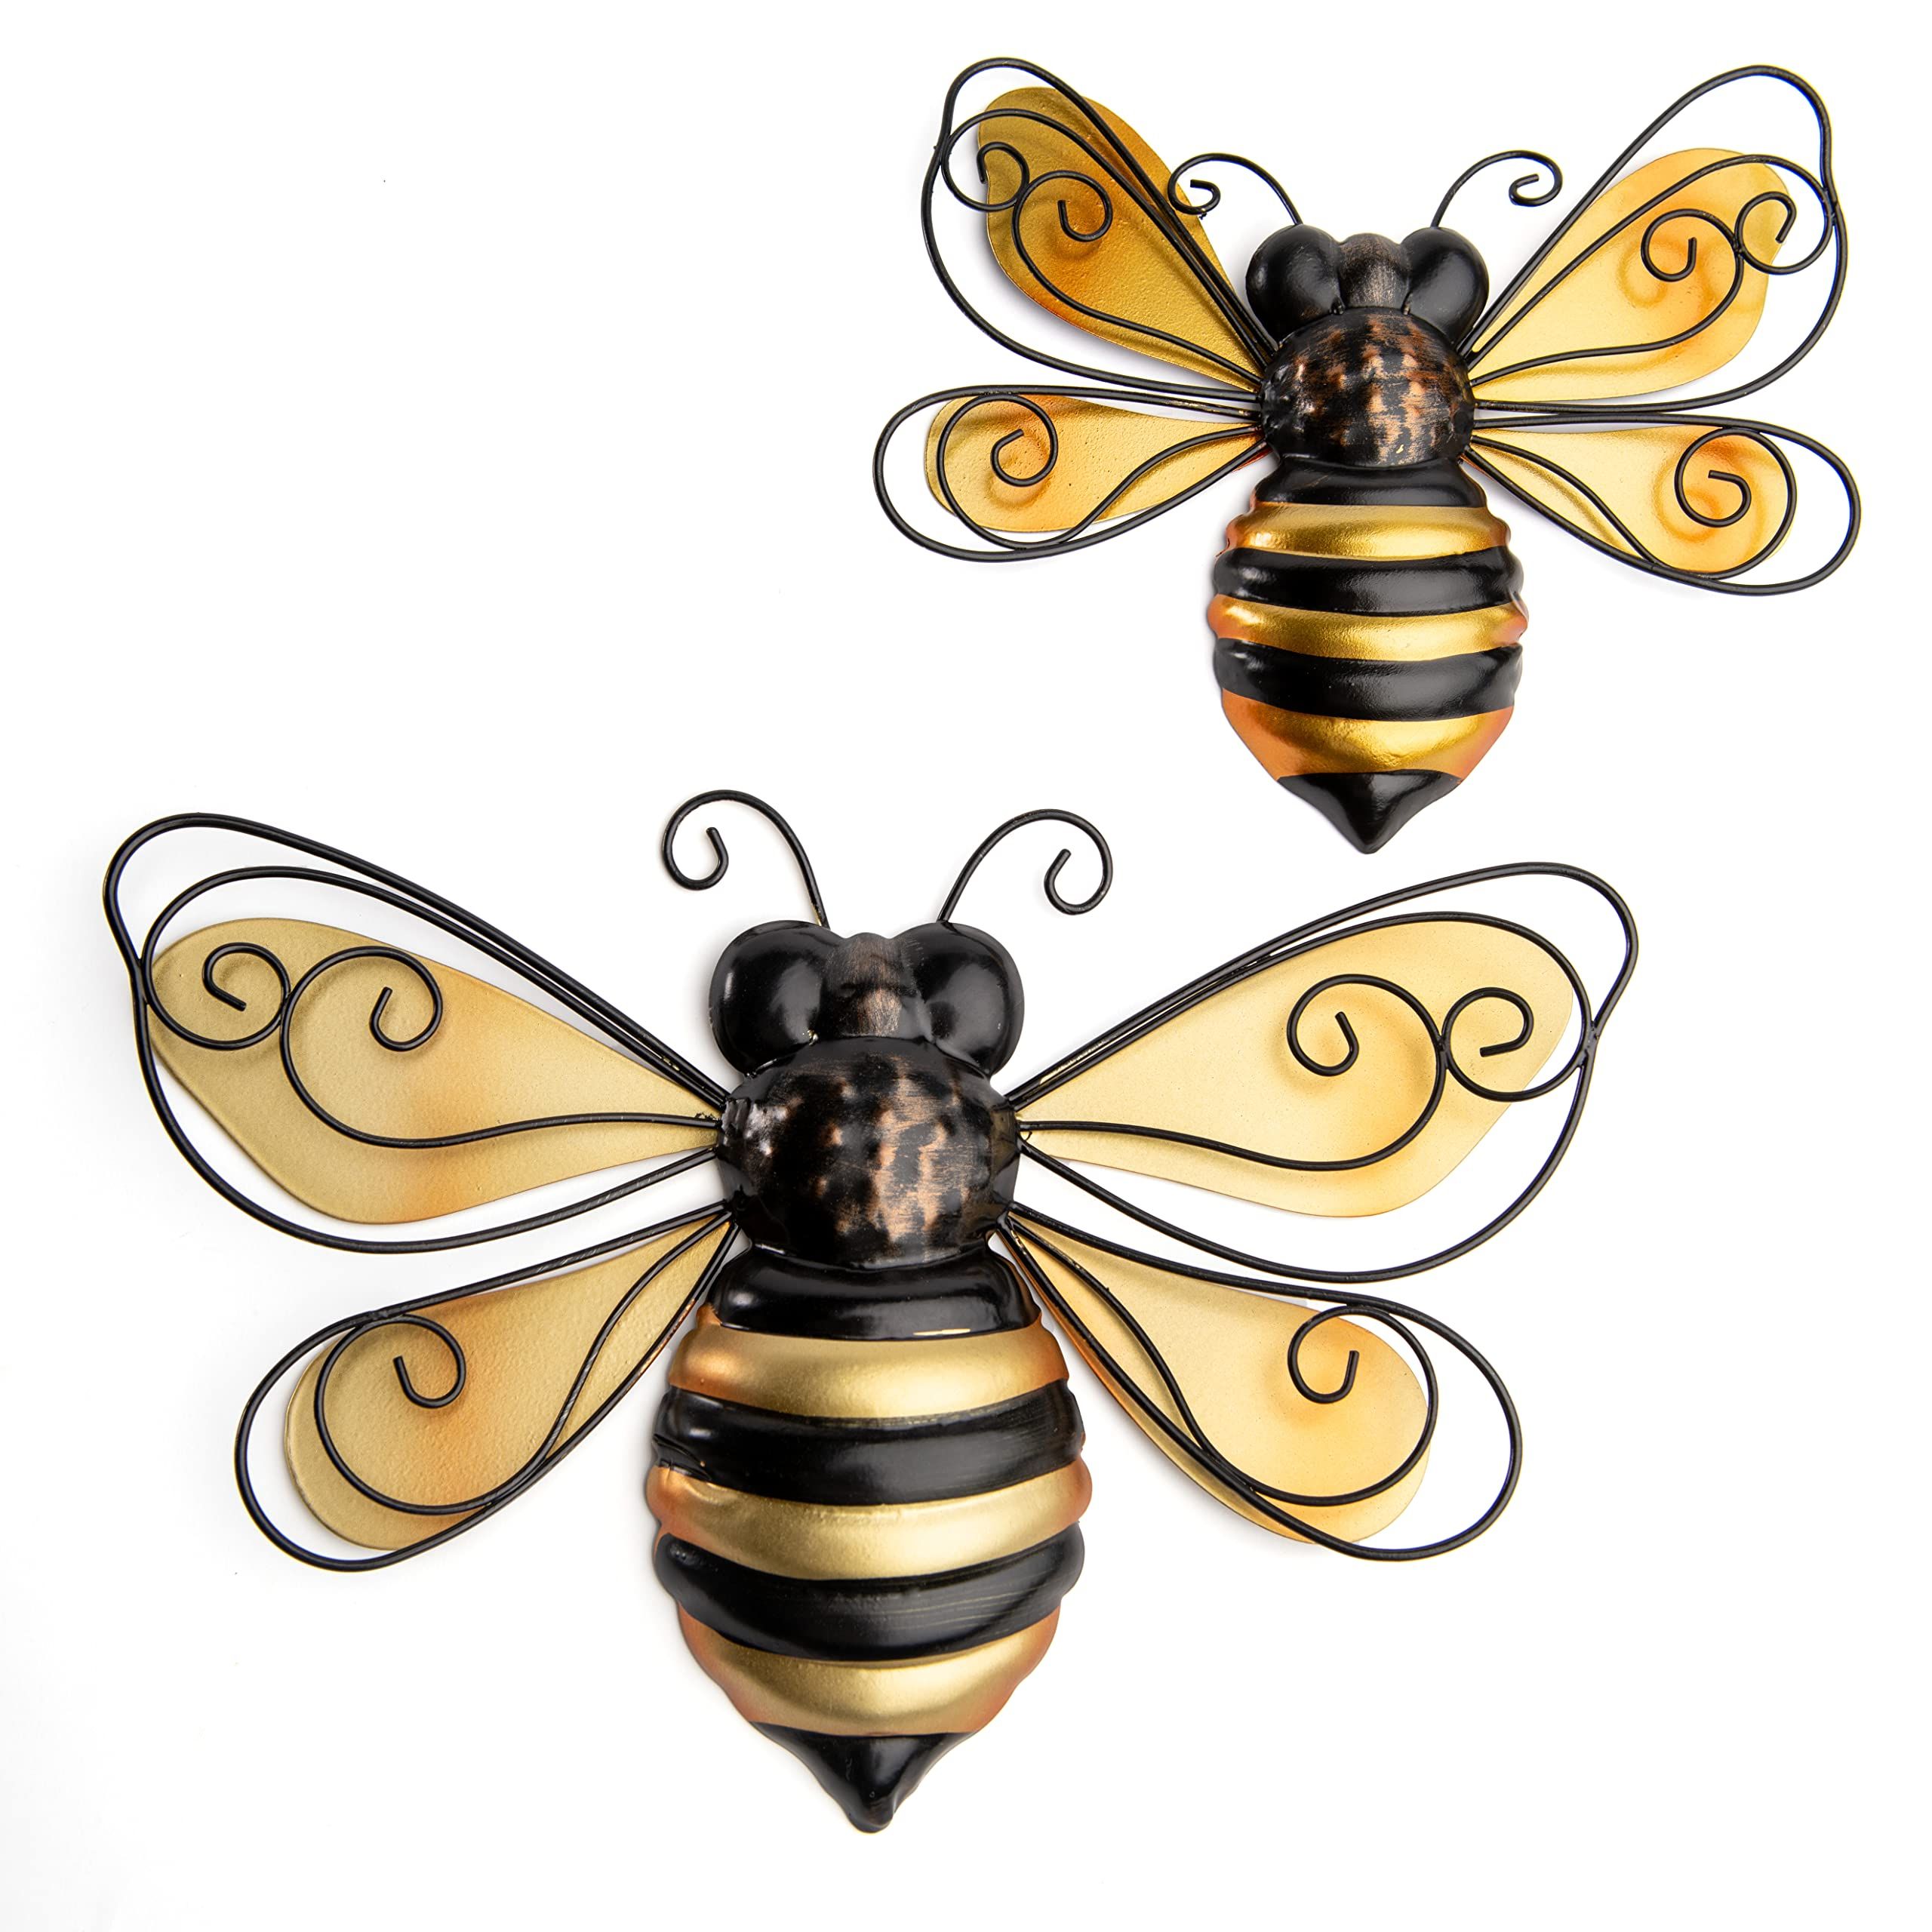 Amazon: Giftcraft Metal Bee Wall Decor Set Of 2, Bee Metal Wall Decor, Bee  Metal Wall Art, Wall Decor For Living Room, Bedroom, Bathroom, Farmhouse,  Metal Home Decor Wall Sculpture : Home With Regard To Recent Metal Wall Bumble Bee Wall Art (View 3 of 15)